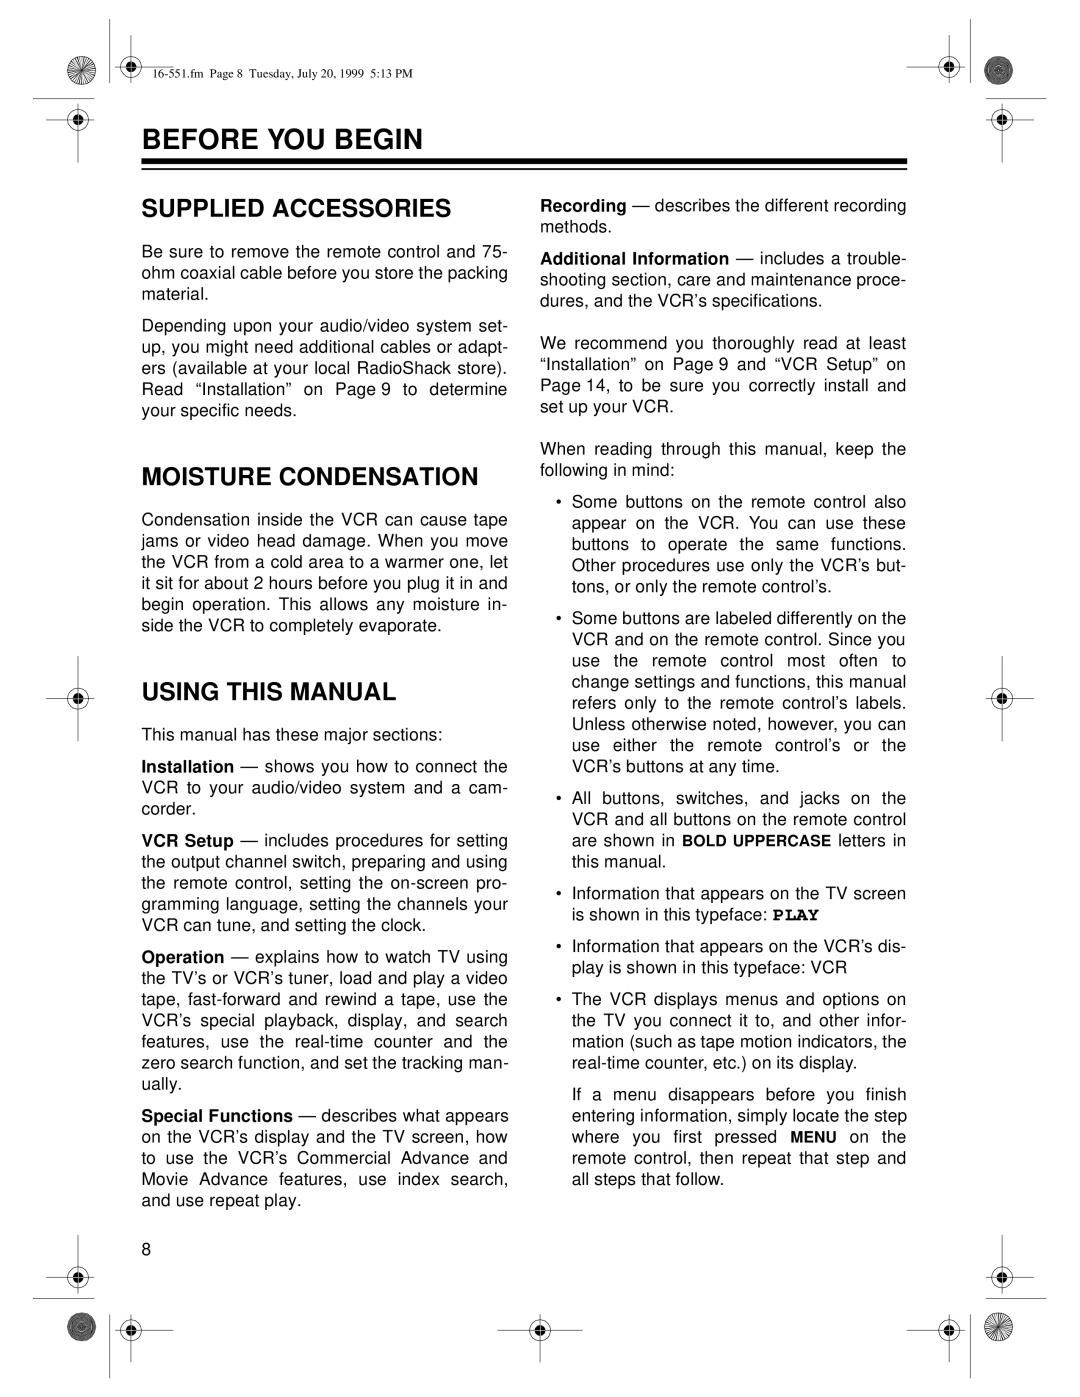 Optimus 63, 114 owner manual Before You Begin, Supplied Accessories, Moisture Condensation, Using This Manual 